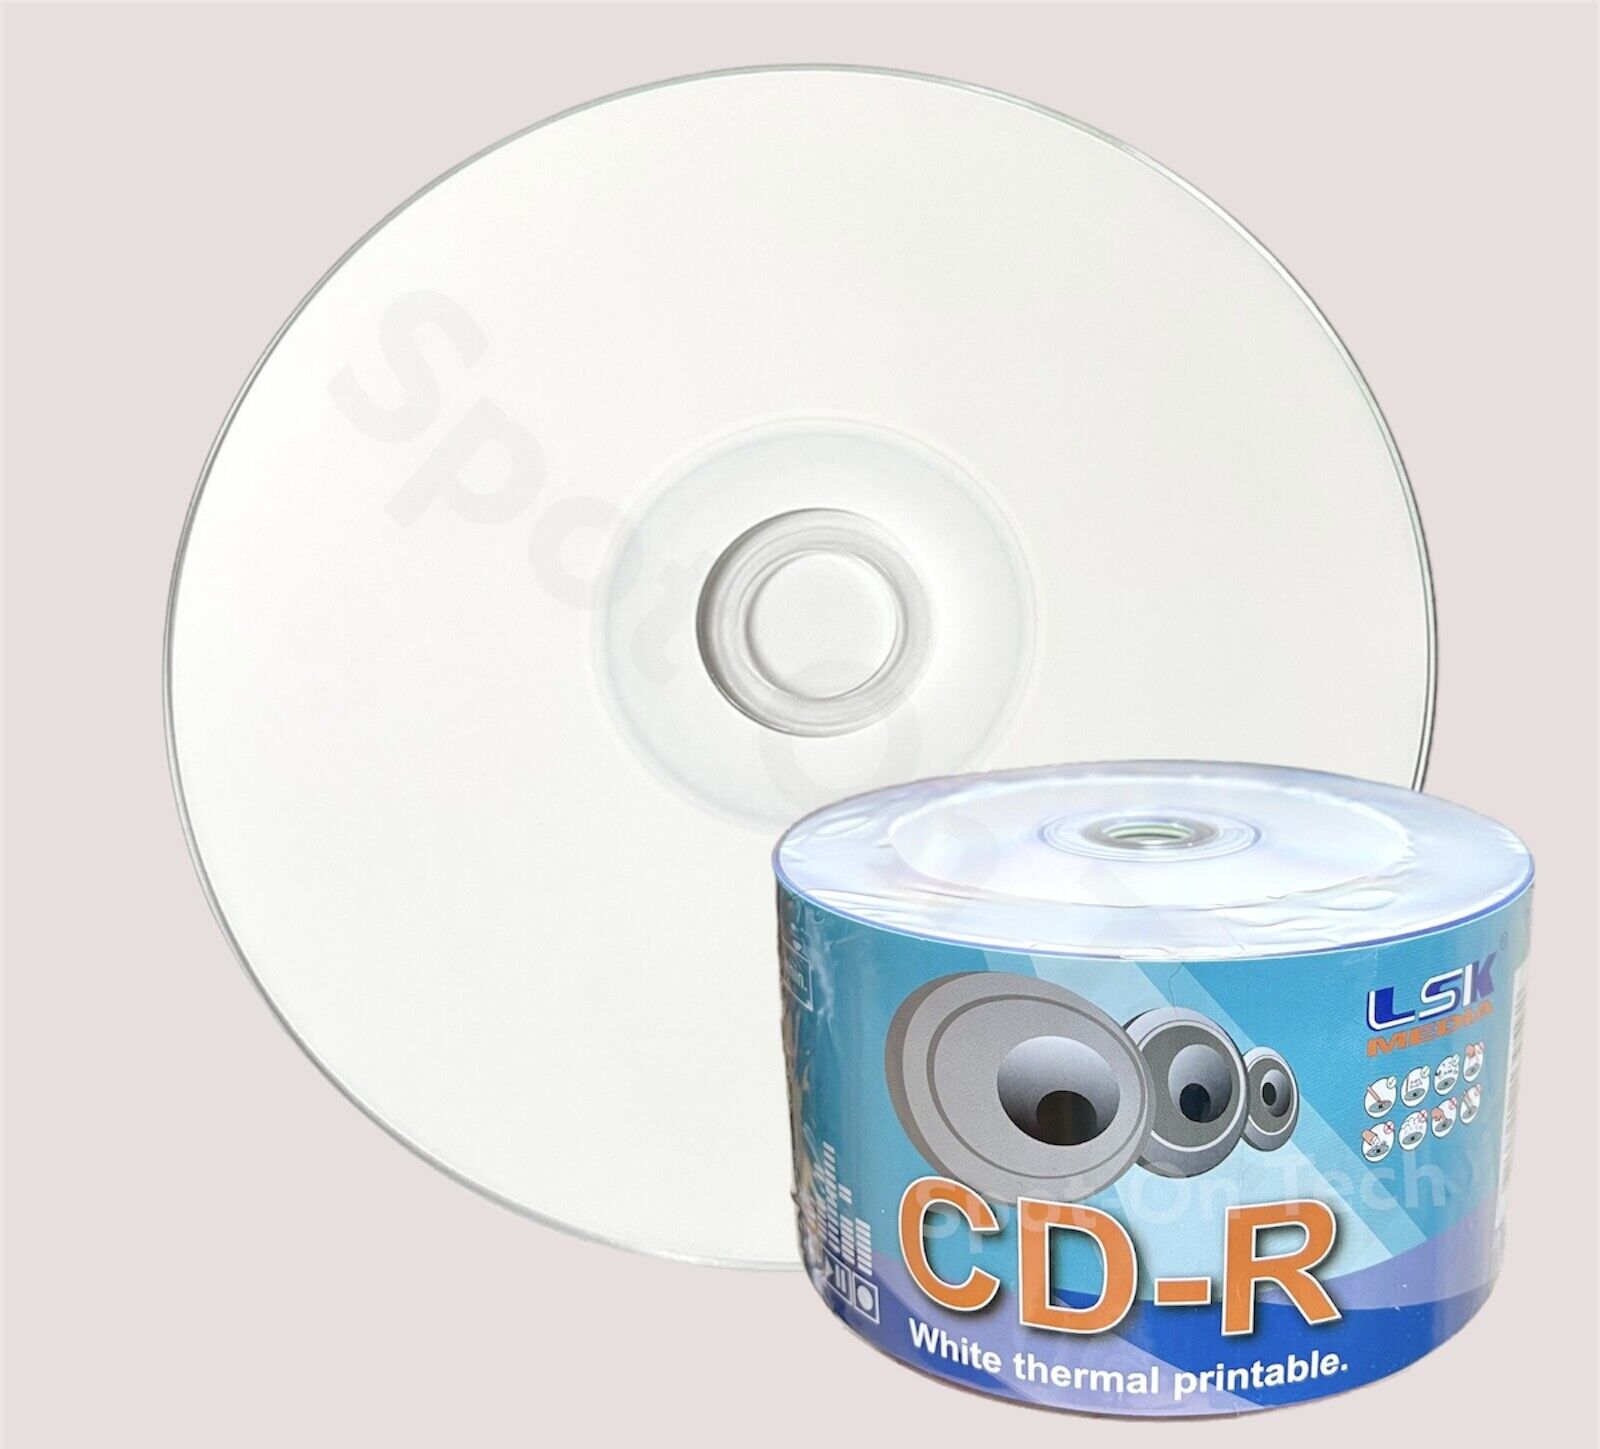 25 LSK CD CD-R White Thermal Duplication Grade - 80Min/700MB/52x in Sleeves